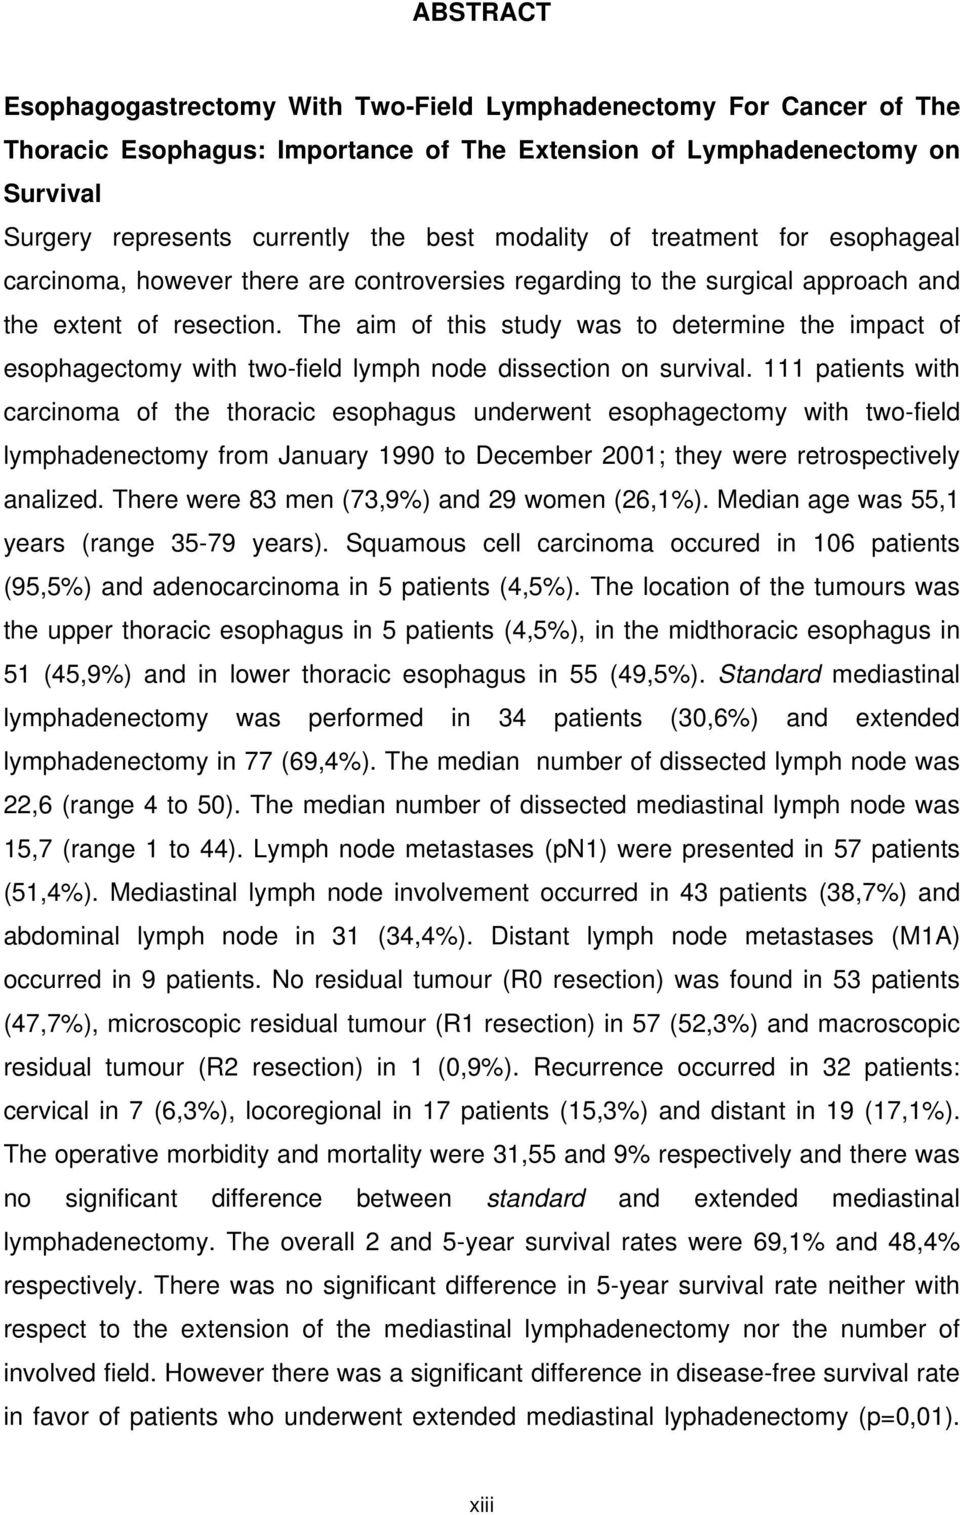 The aim of this study was to determine the impact of esophagectomy with two-field lymph node dissection on survival.